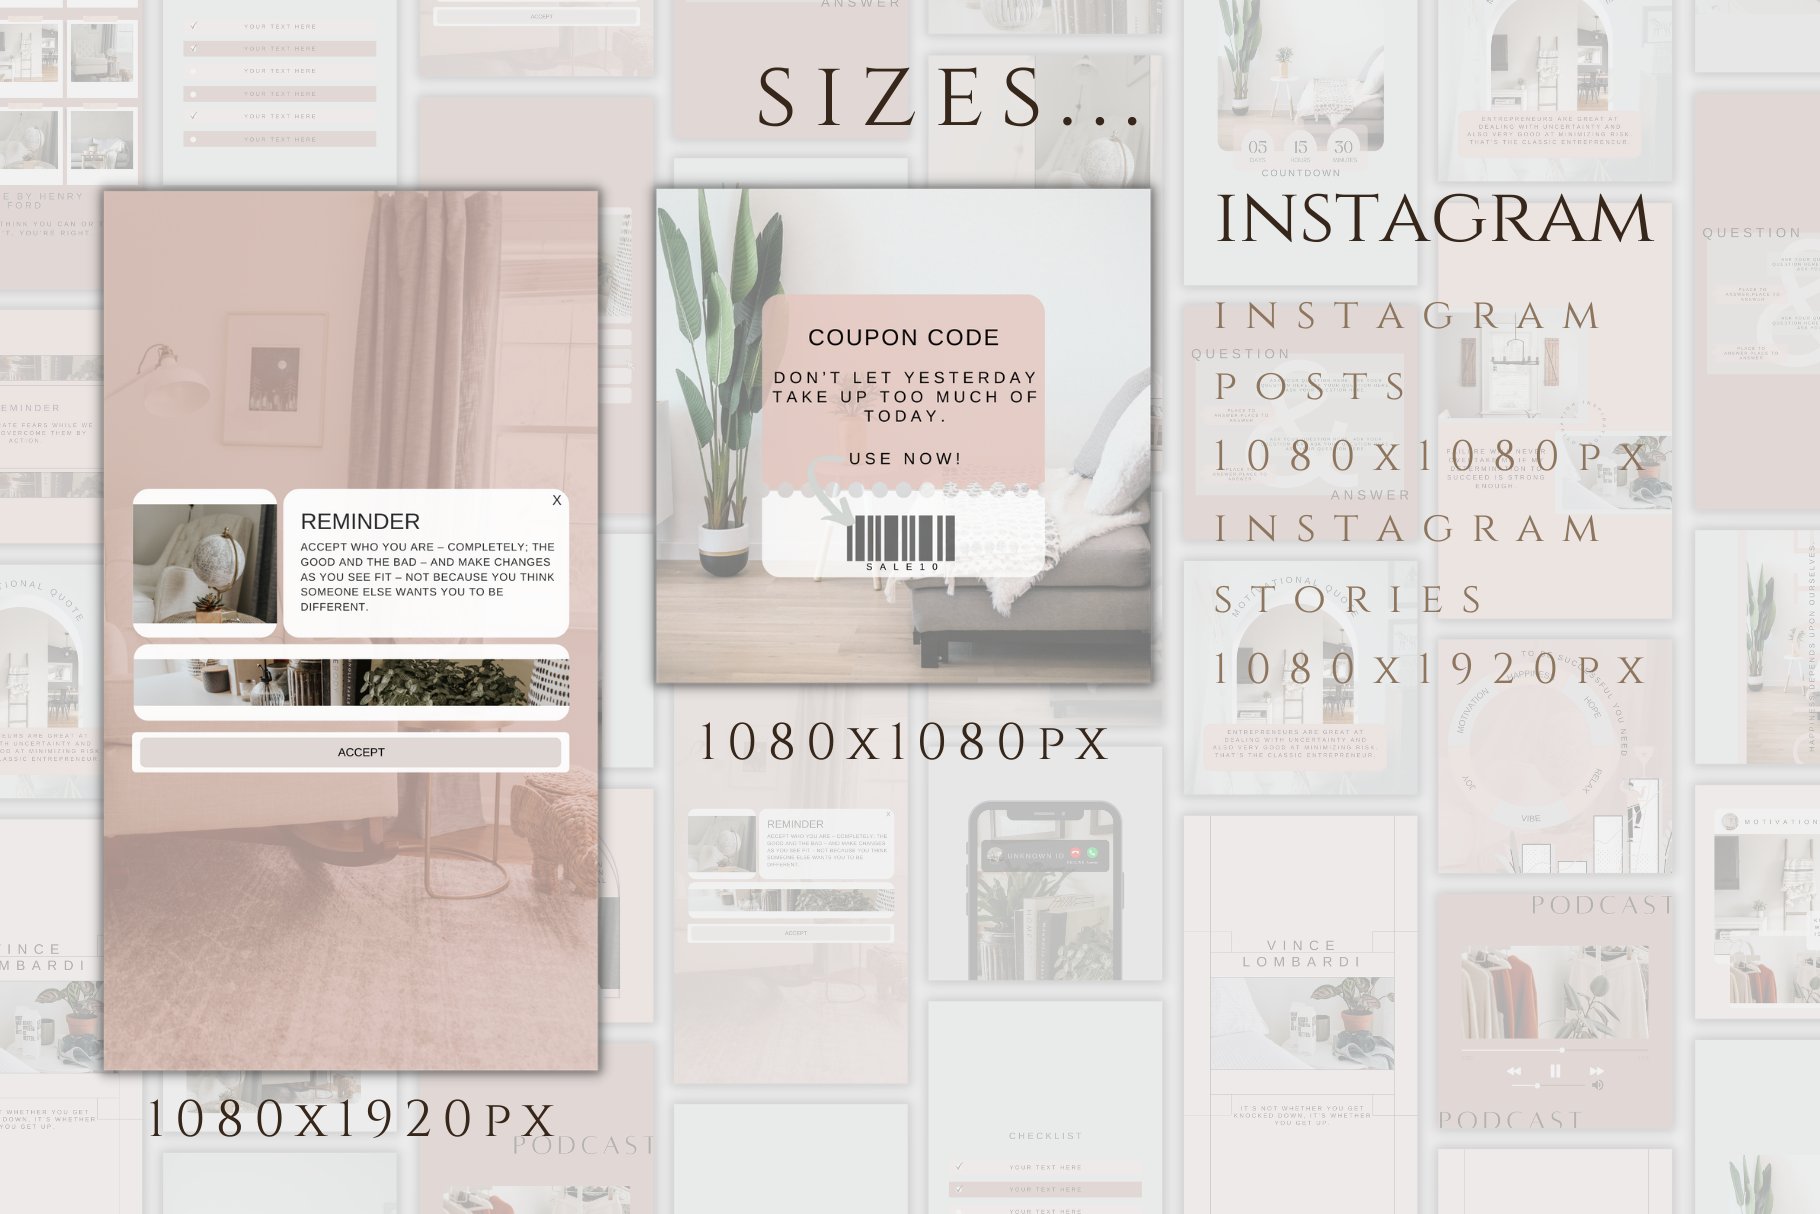 Change posts and stories sizes in the simplest way.